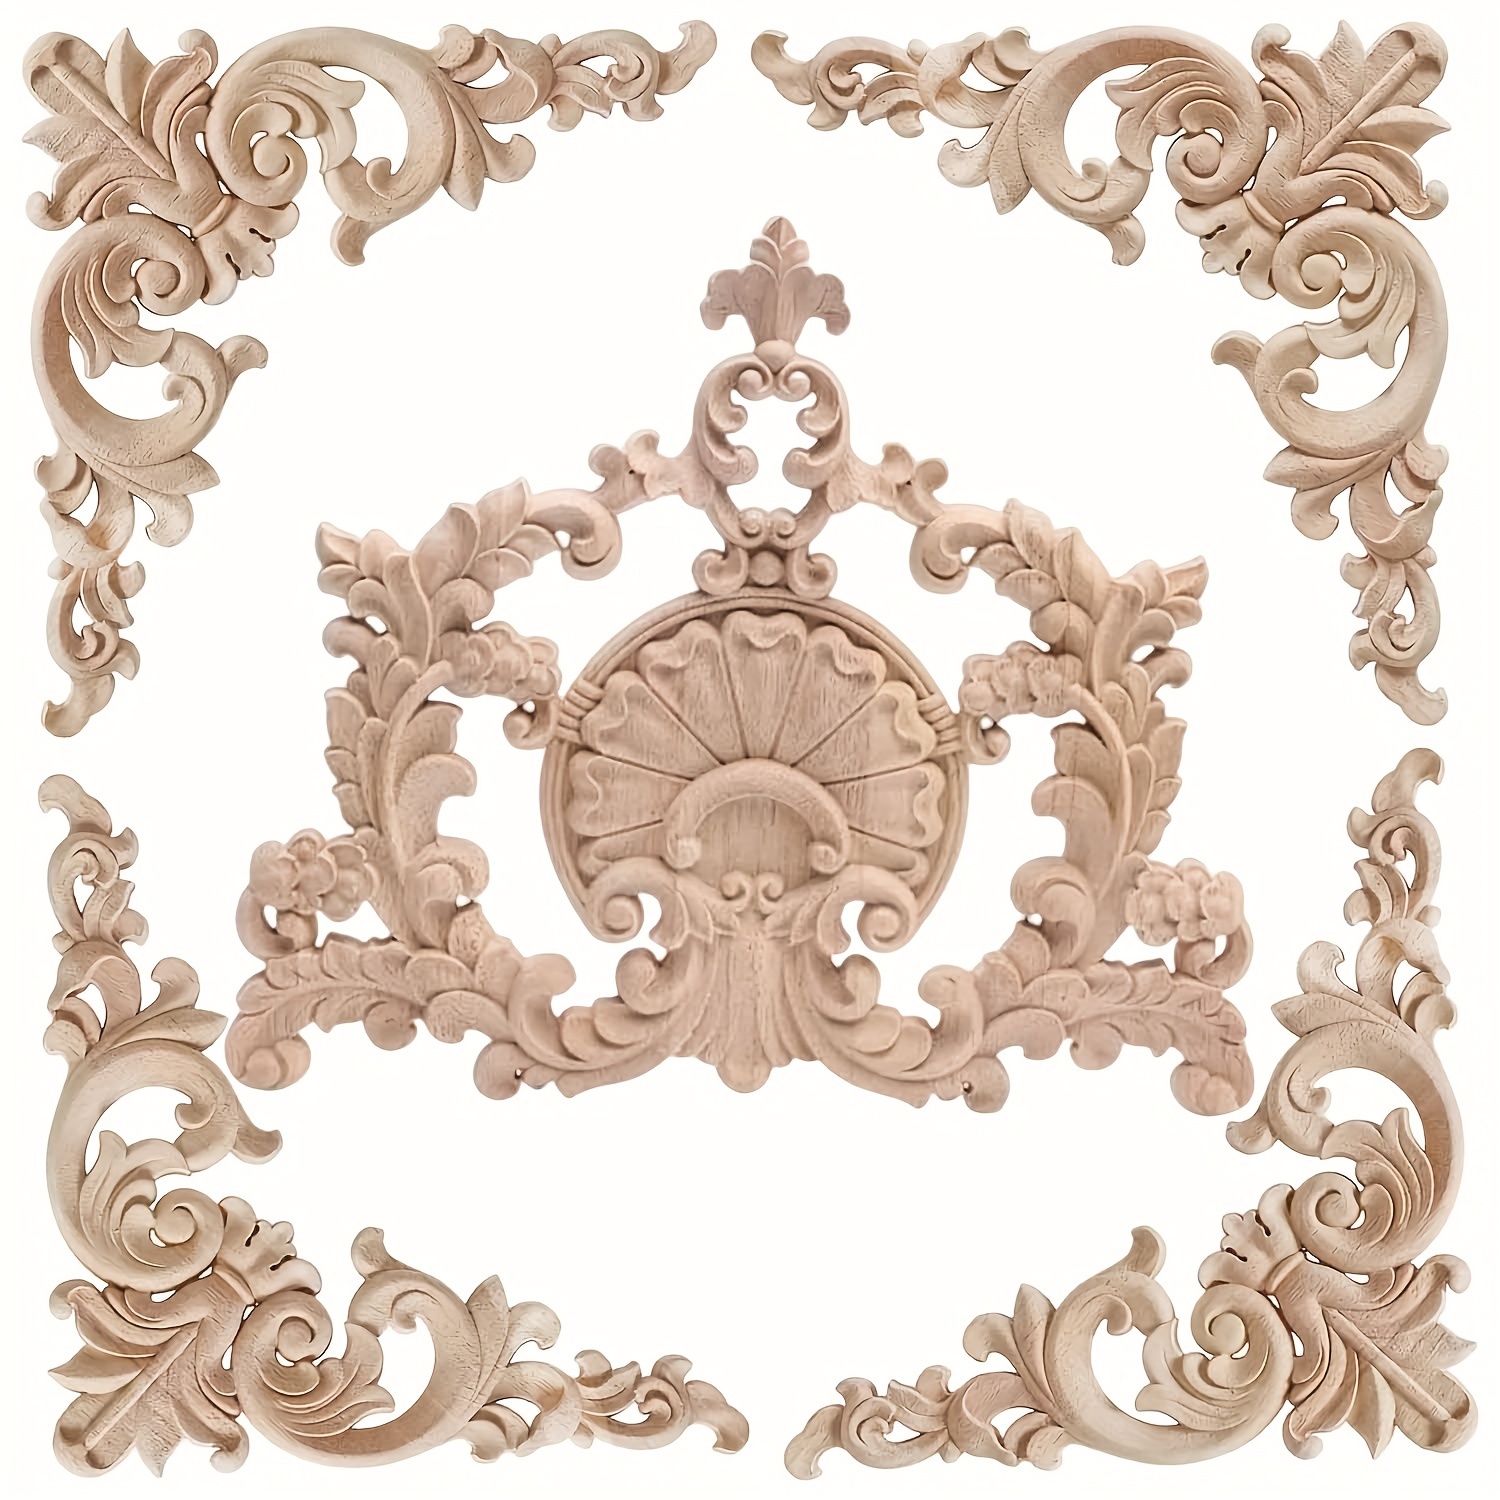 

5pcs Wood Appliques Onlays Decorative For Furniture Wood Carved Onlay For Bed Door Cabinet Wardrobe Furniture Long Decoration Unpainted Wood Carving Decoration